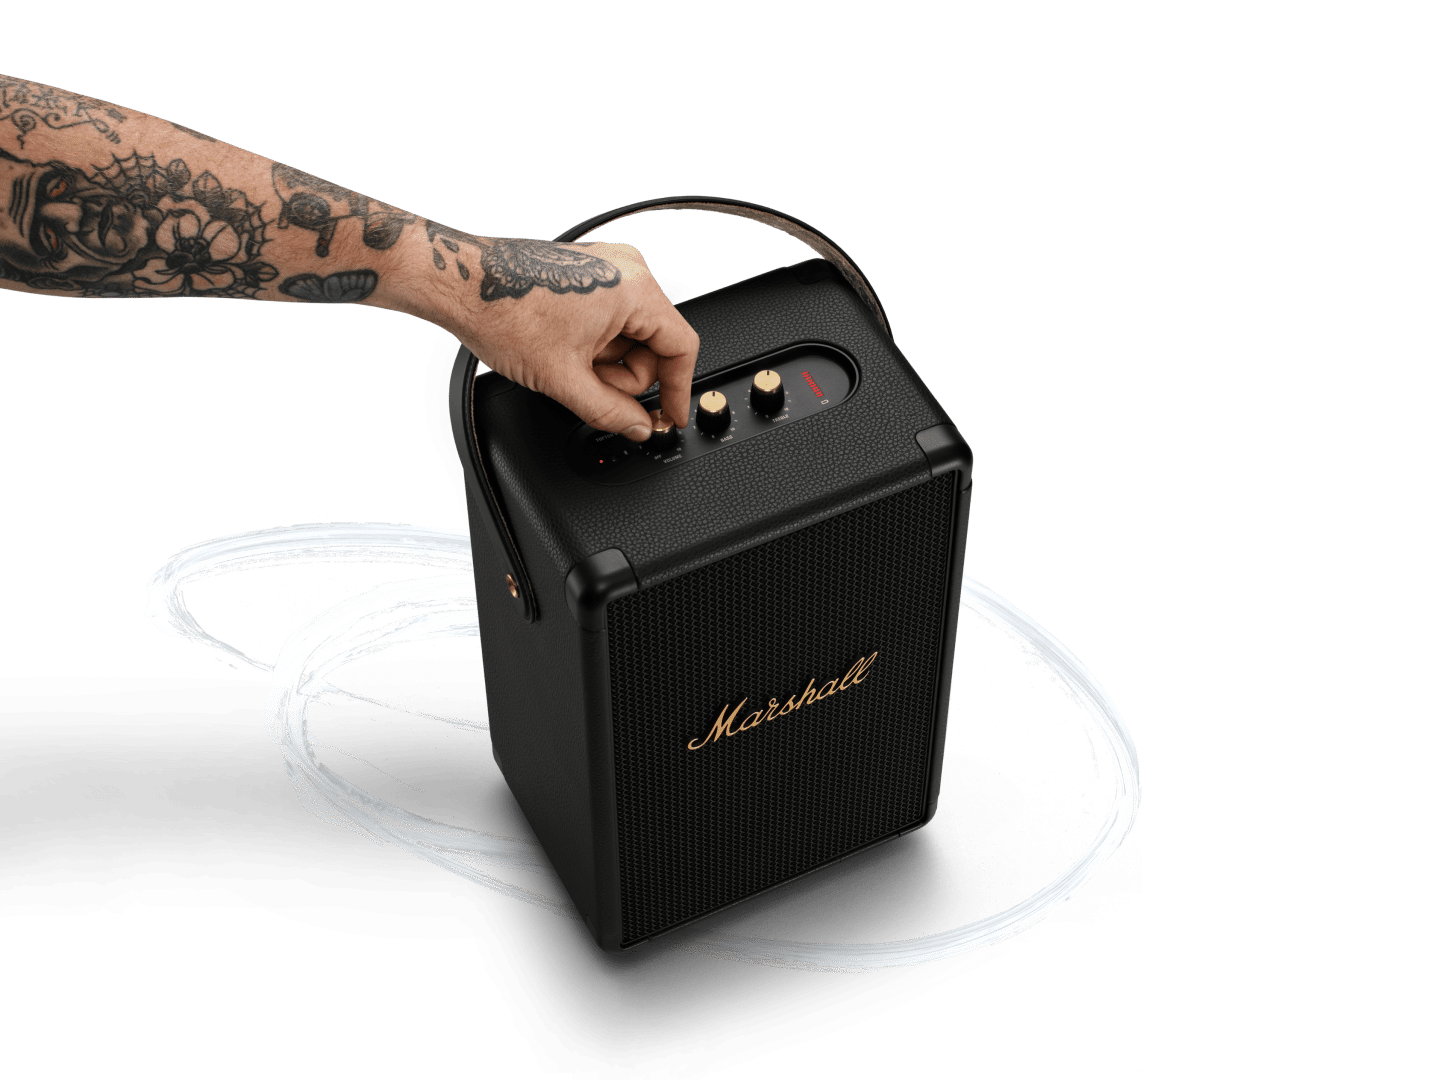 Tufton portable speaker delivers powerful sound and long playtime ...